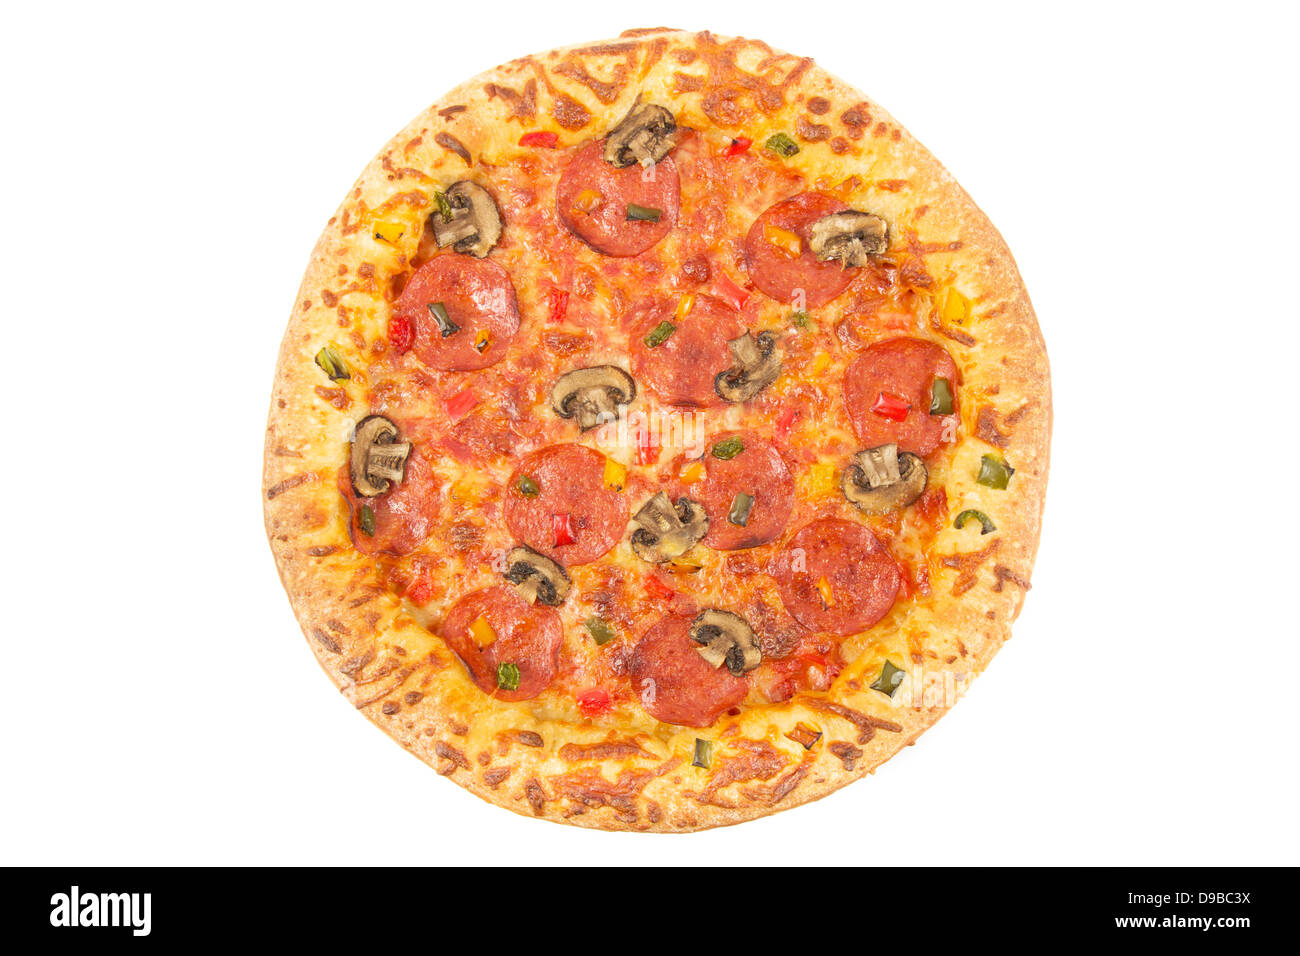 Whole pepperoni pizza top view on a white background Stock Photo